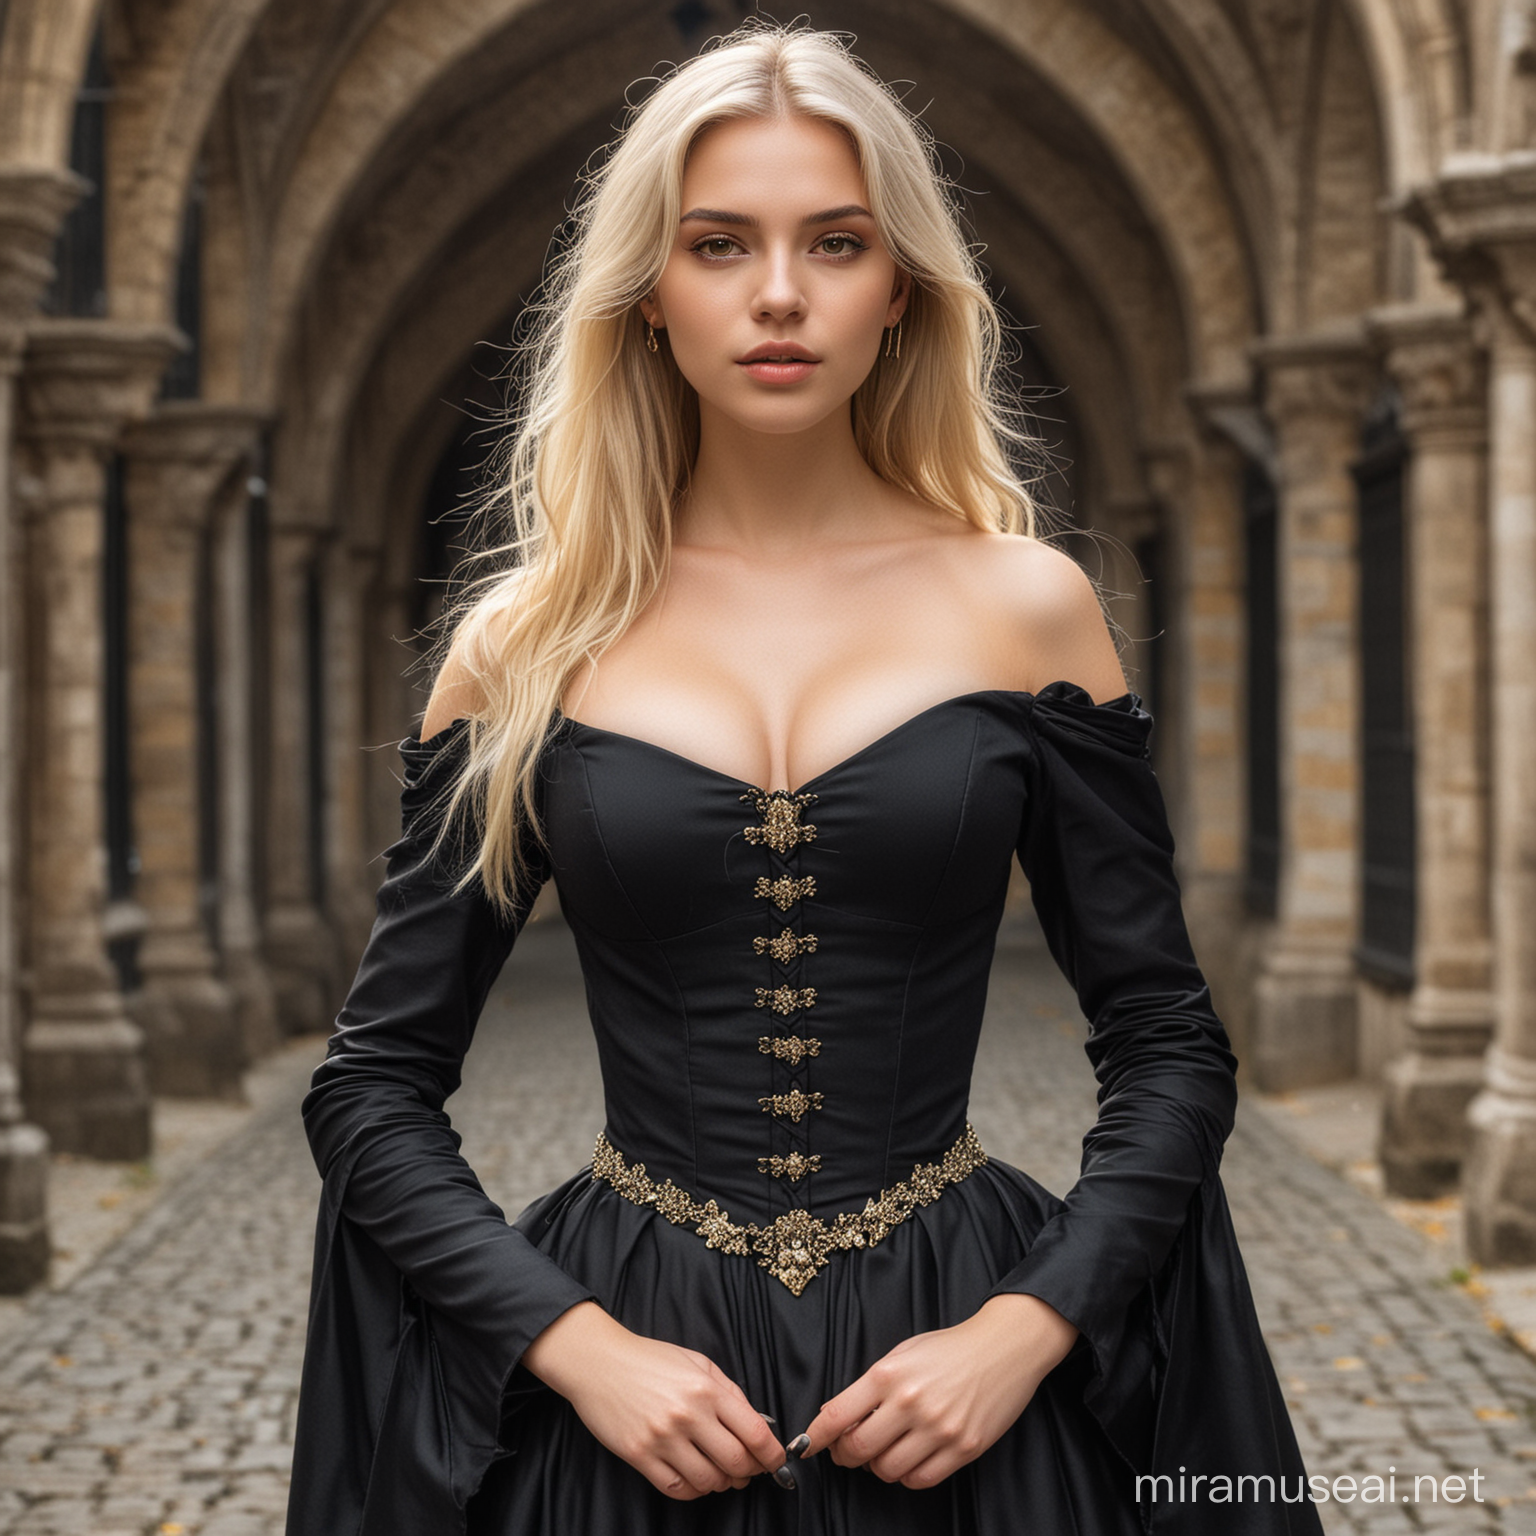 Stylish Blonde Woman in Medieval Black Dress and Heels